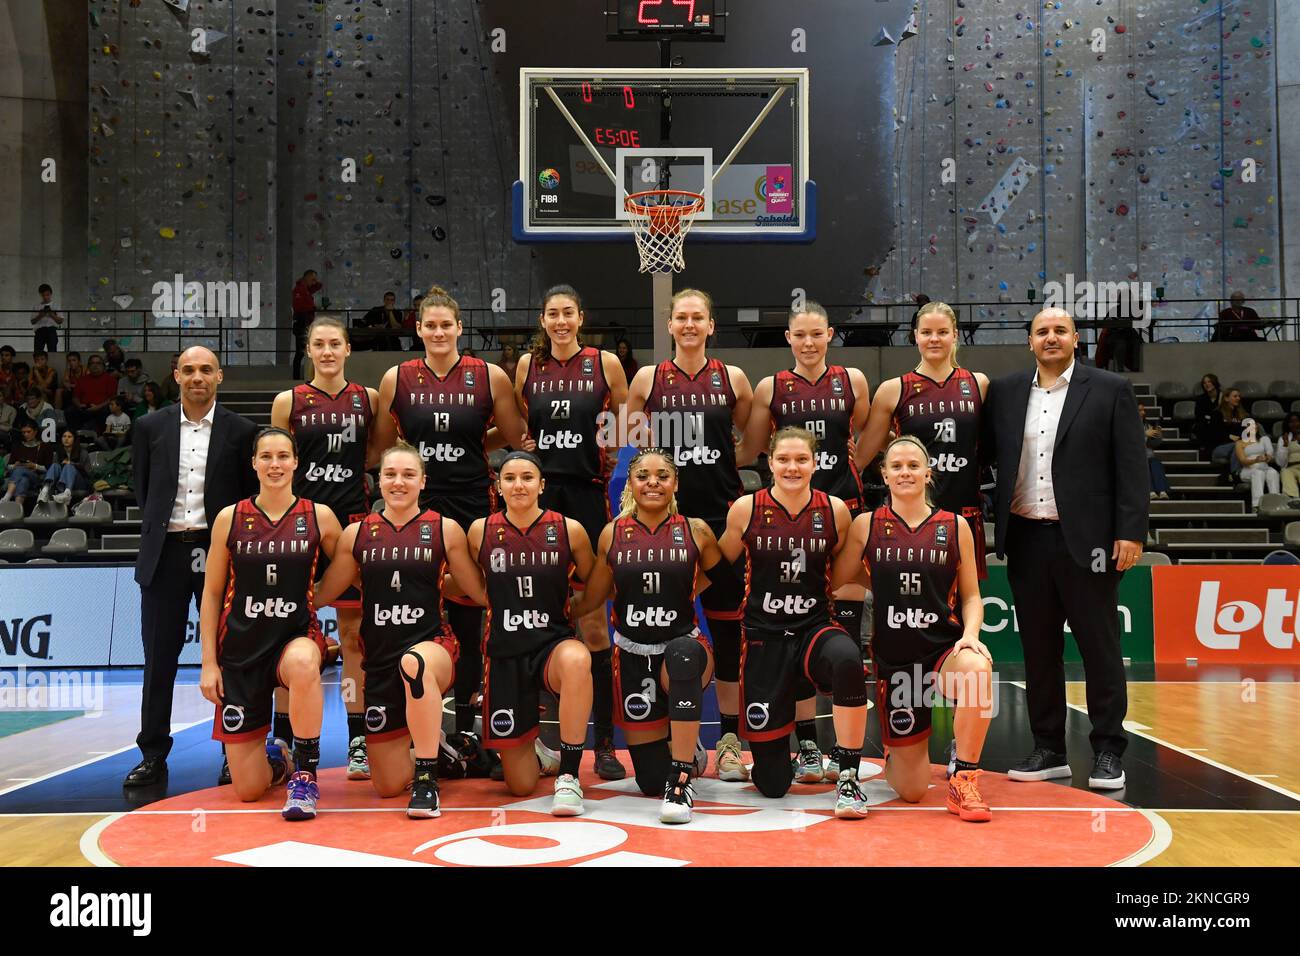 Belgian Cats' players pose for the photographer during a basketball game between Belgium's national team The Belgian Cats and Bosnia-Herzegovina, Sunday 27 November 2022 in Leuven, the fourth game in group A of the qualifications for the 2023 Women's Basketball European championships. BELGA PHOTO JOHN THYS Stock Photo